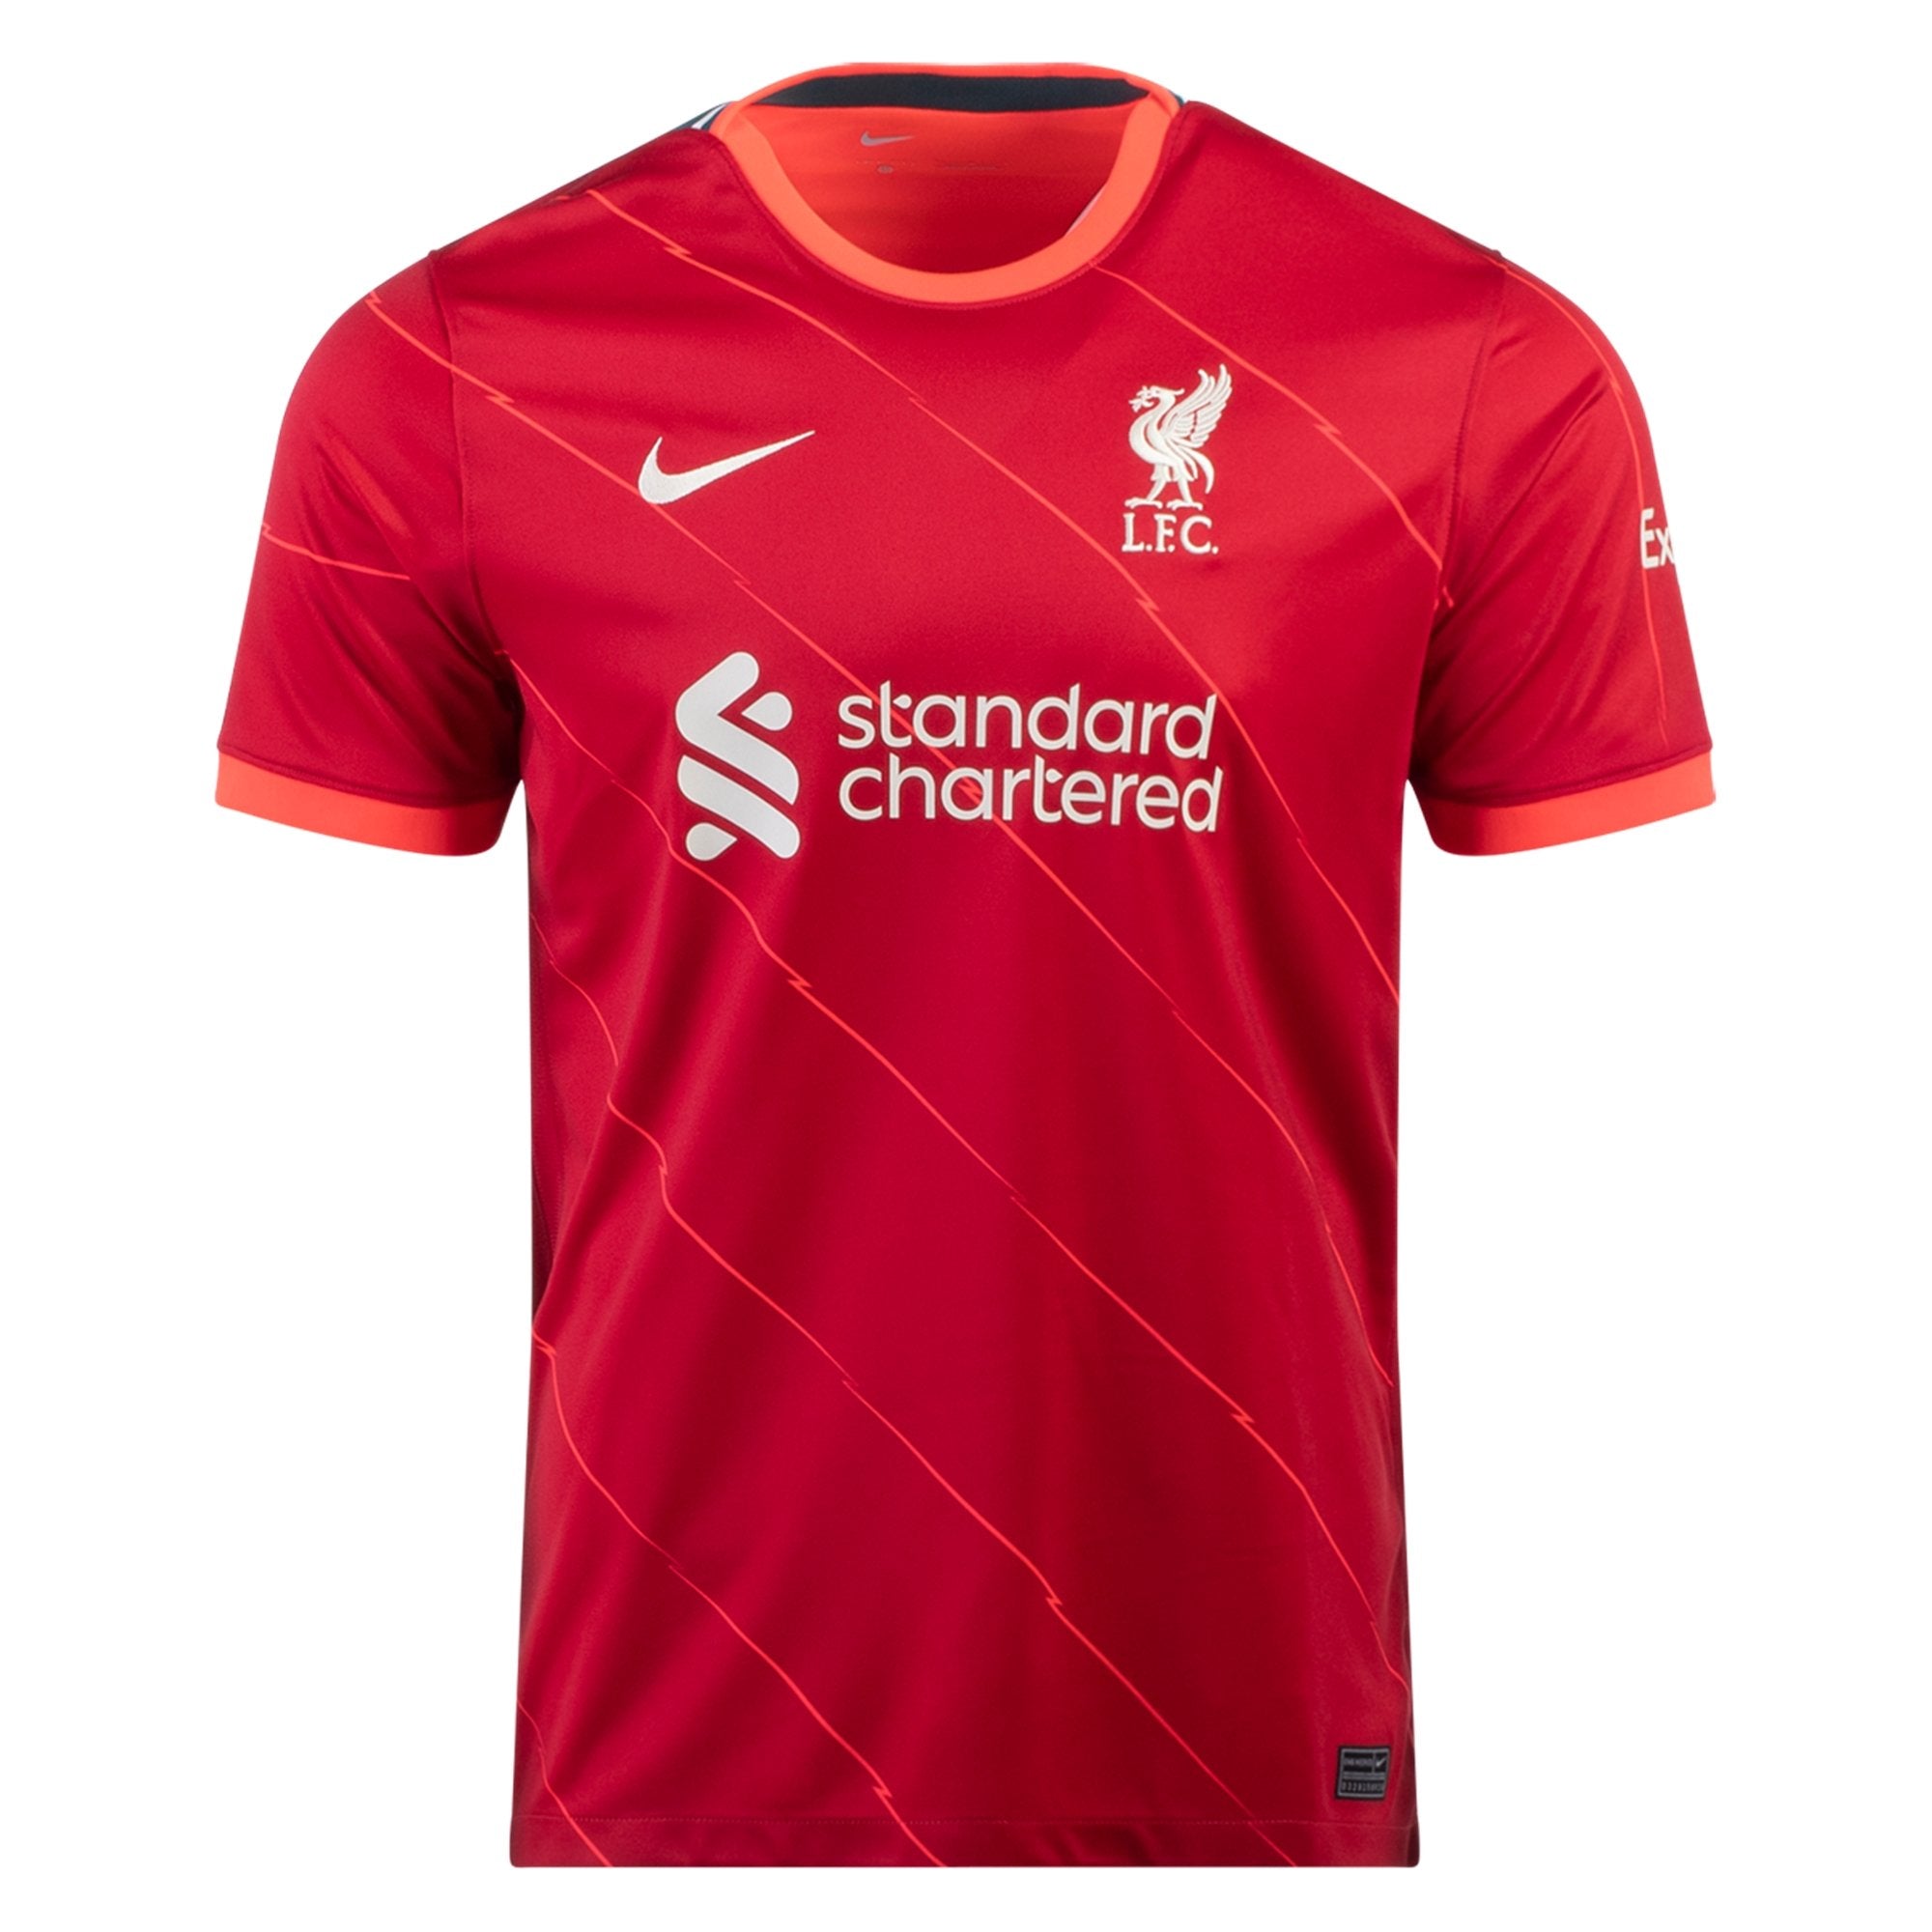 Back to the future as new LFC kit honours legendary Reds manager